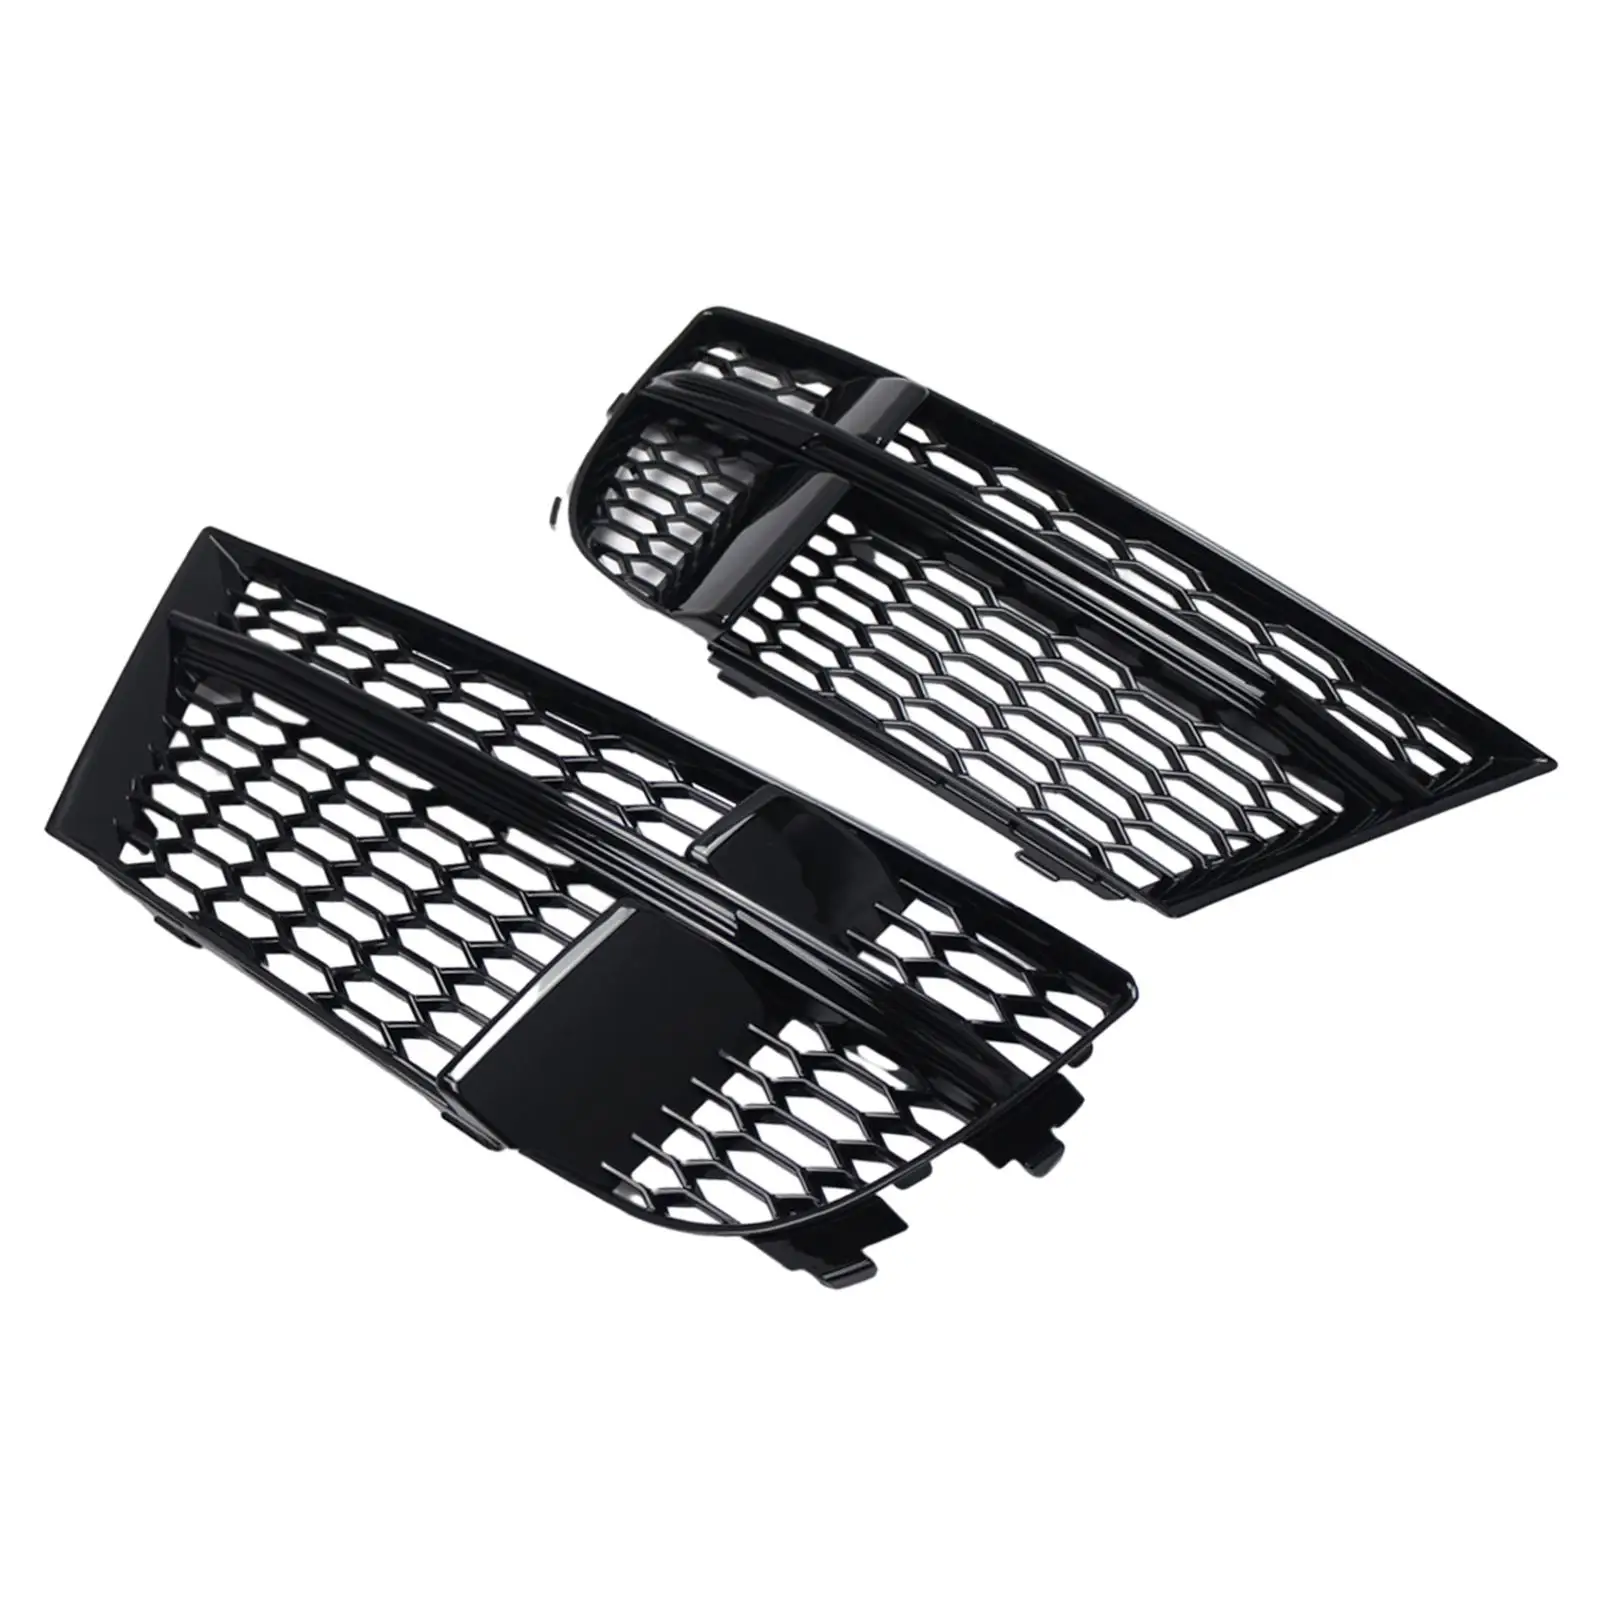 

2x Air Guide Grille Honeycomb Mesh Grille for Audi A3 Easy Installation